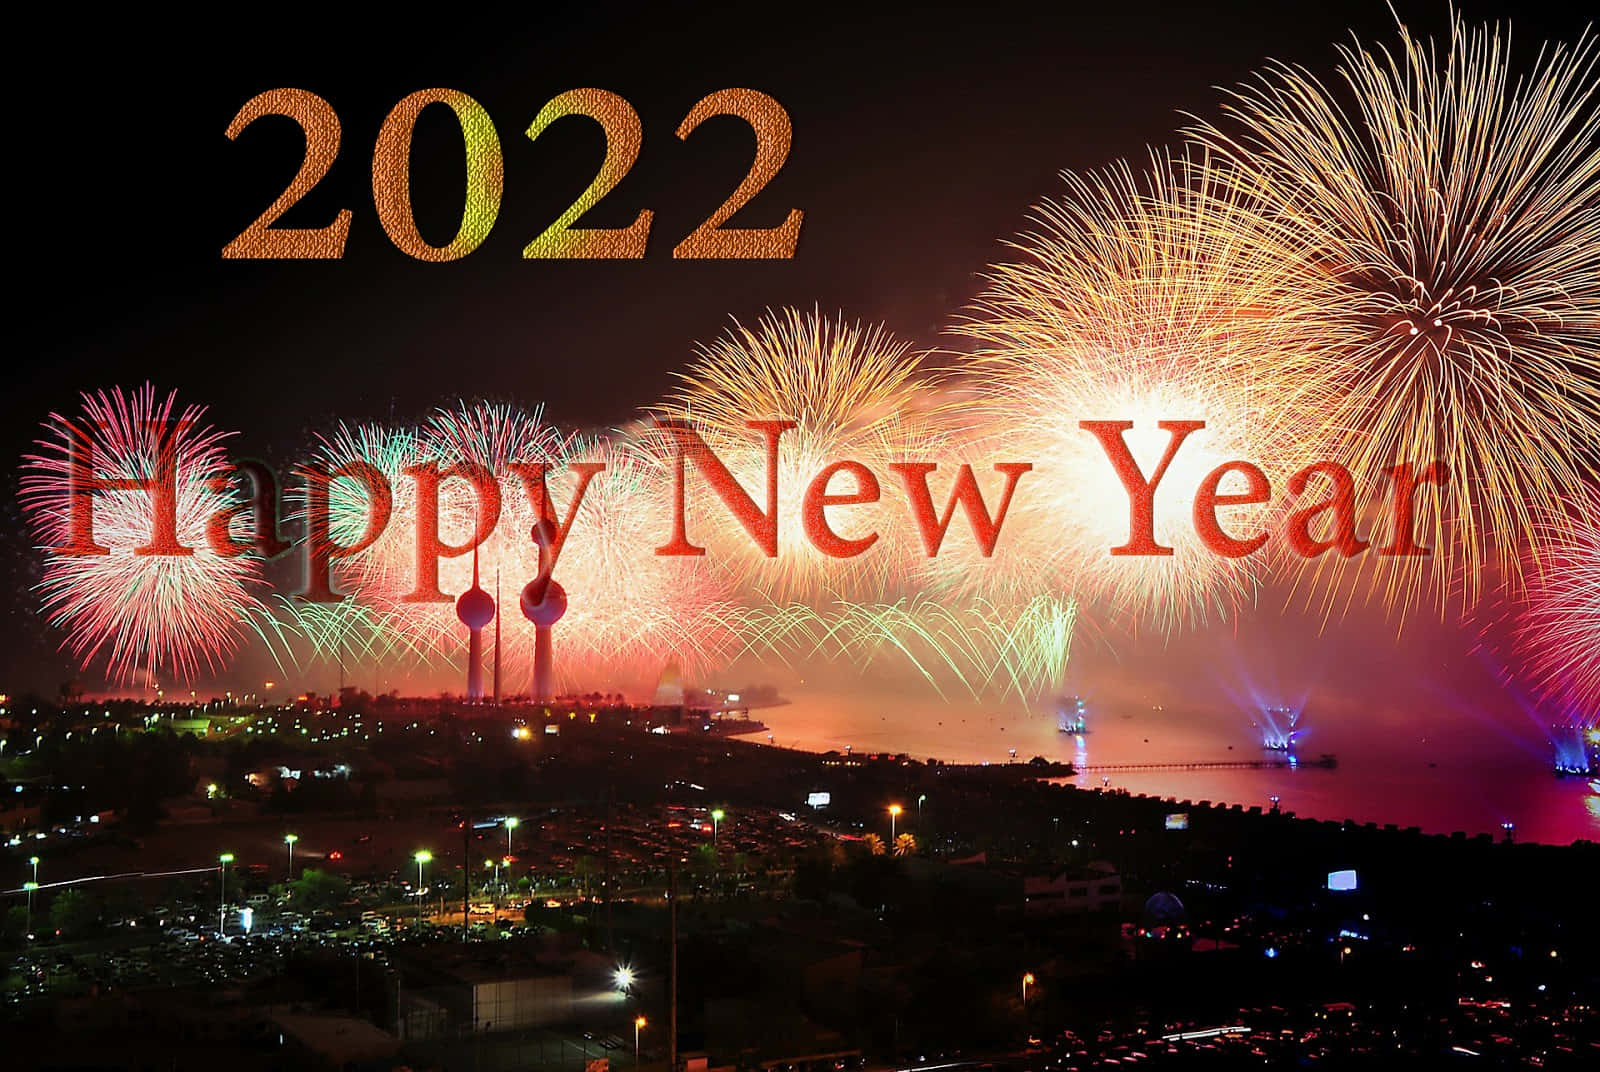 Wishing You a Very Happy&Prosperous New Year 2022!